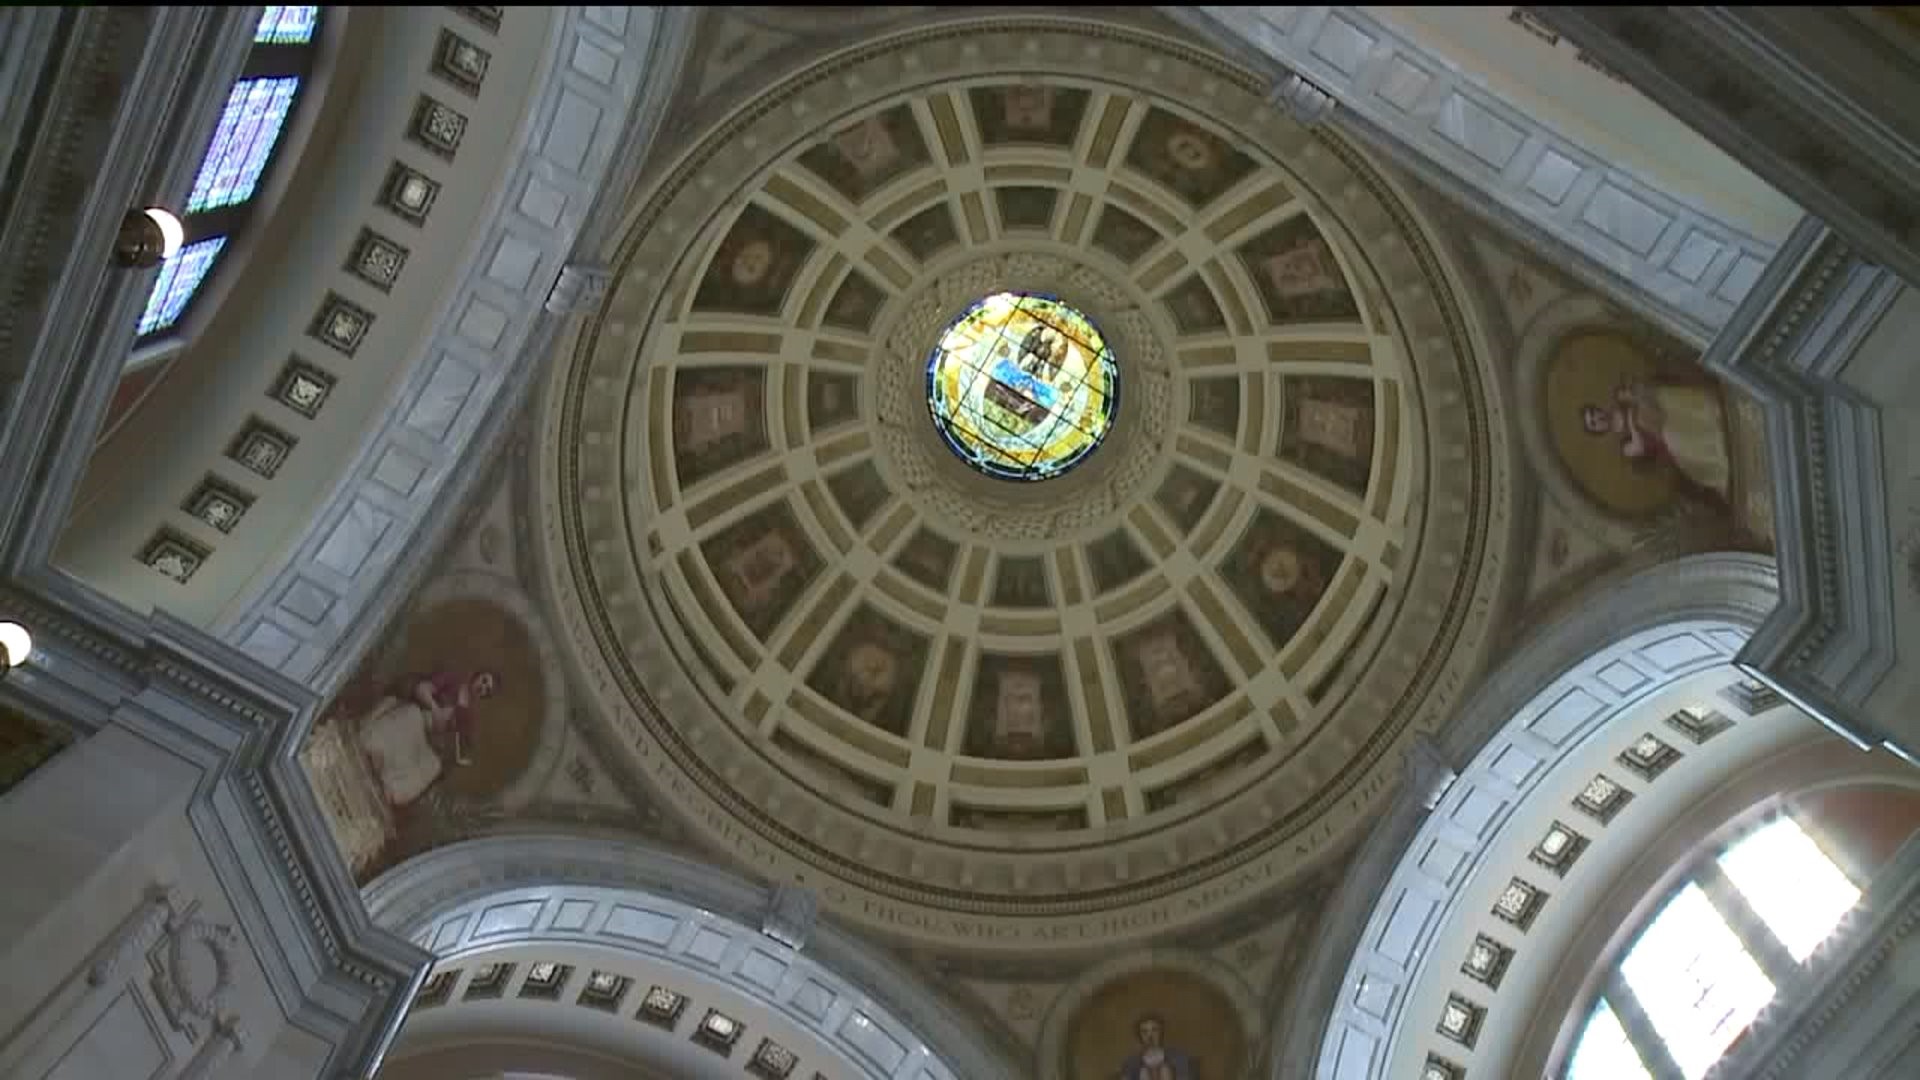 For $500, You Can Get Married in Landmark Luzerne County Building